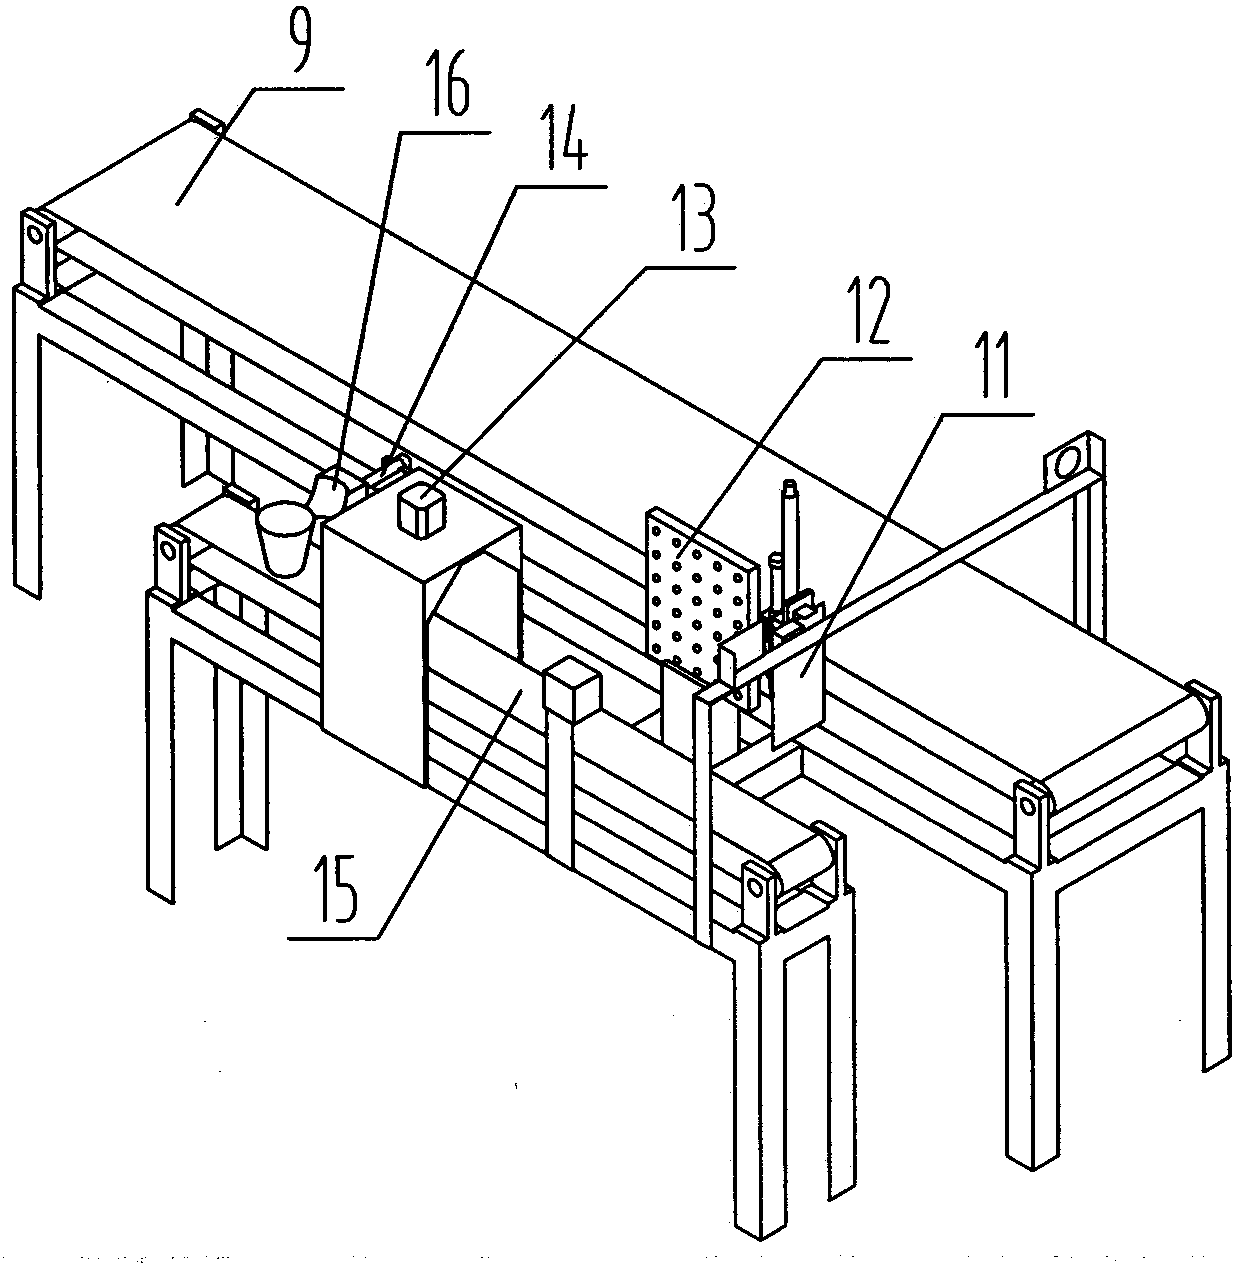 Full-automatic melon stock and scion grafting machine